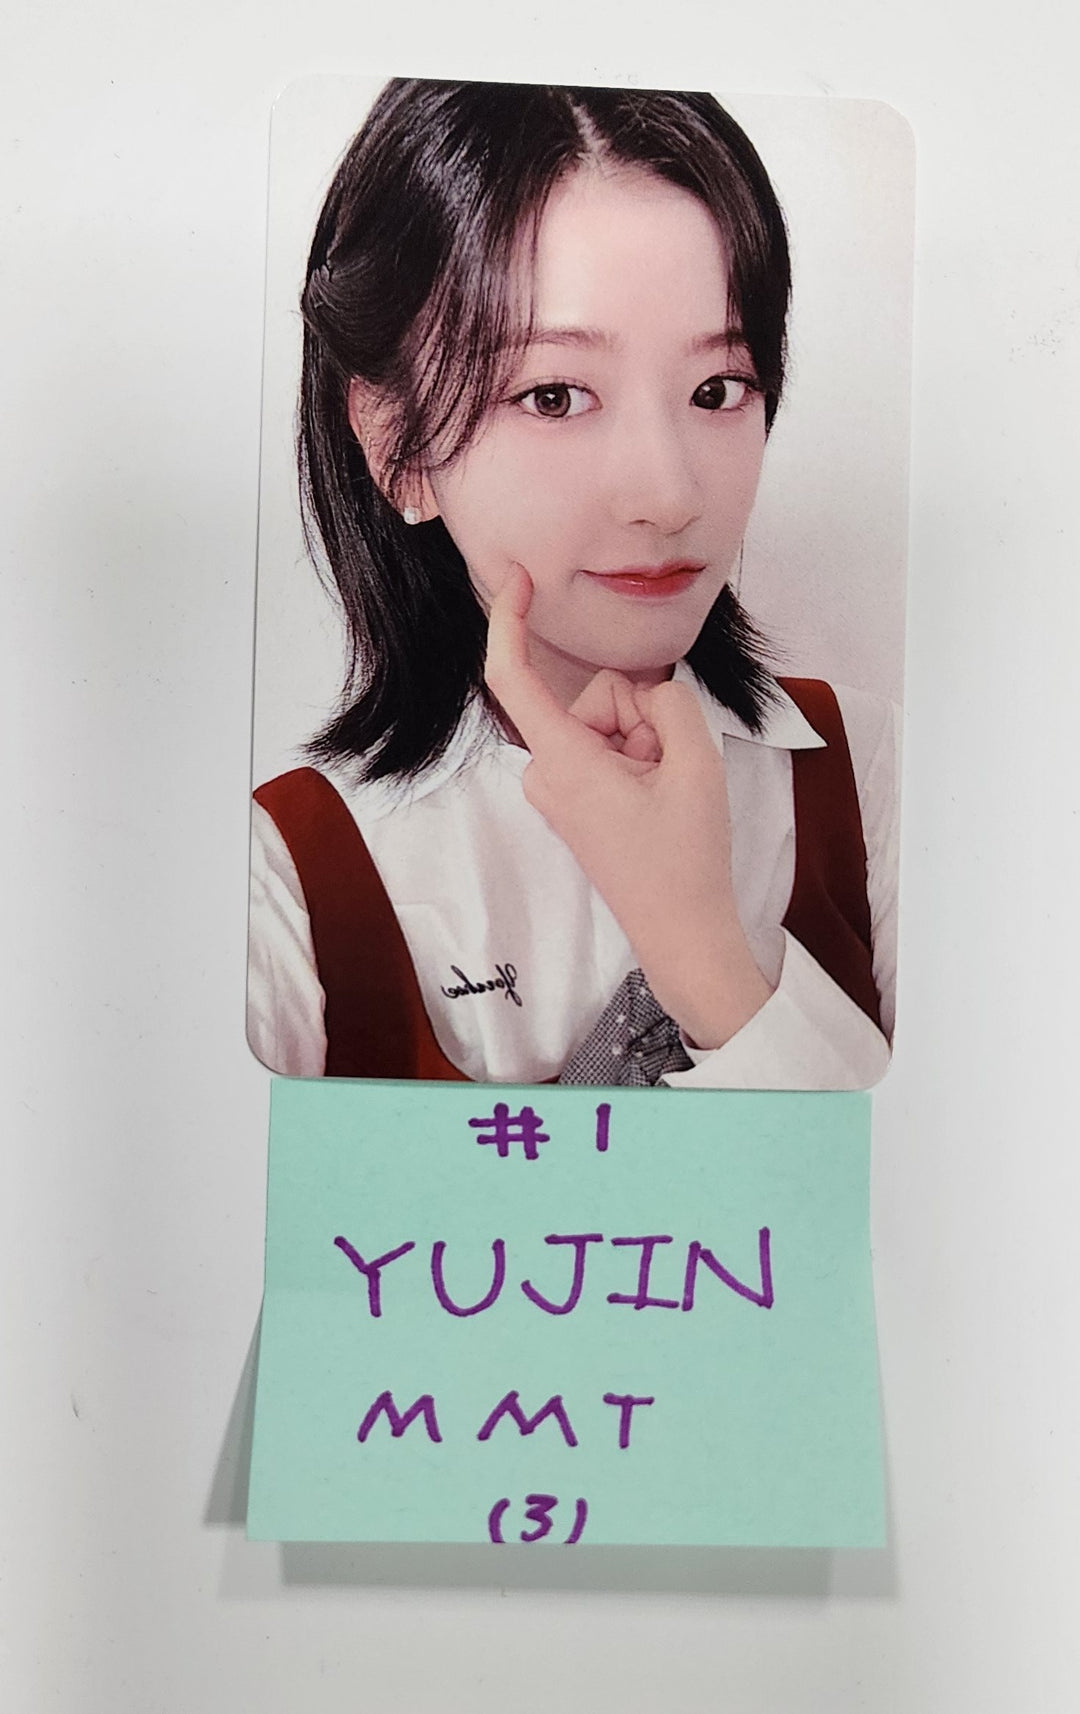 IVE "IVE Switch" - MMT Fansign Event Photocard [Restocked 5/22] [24.5.21]